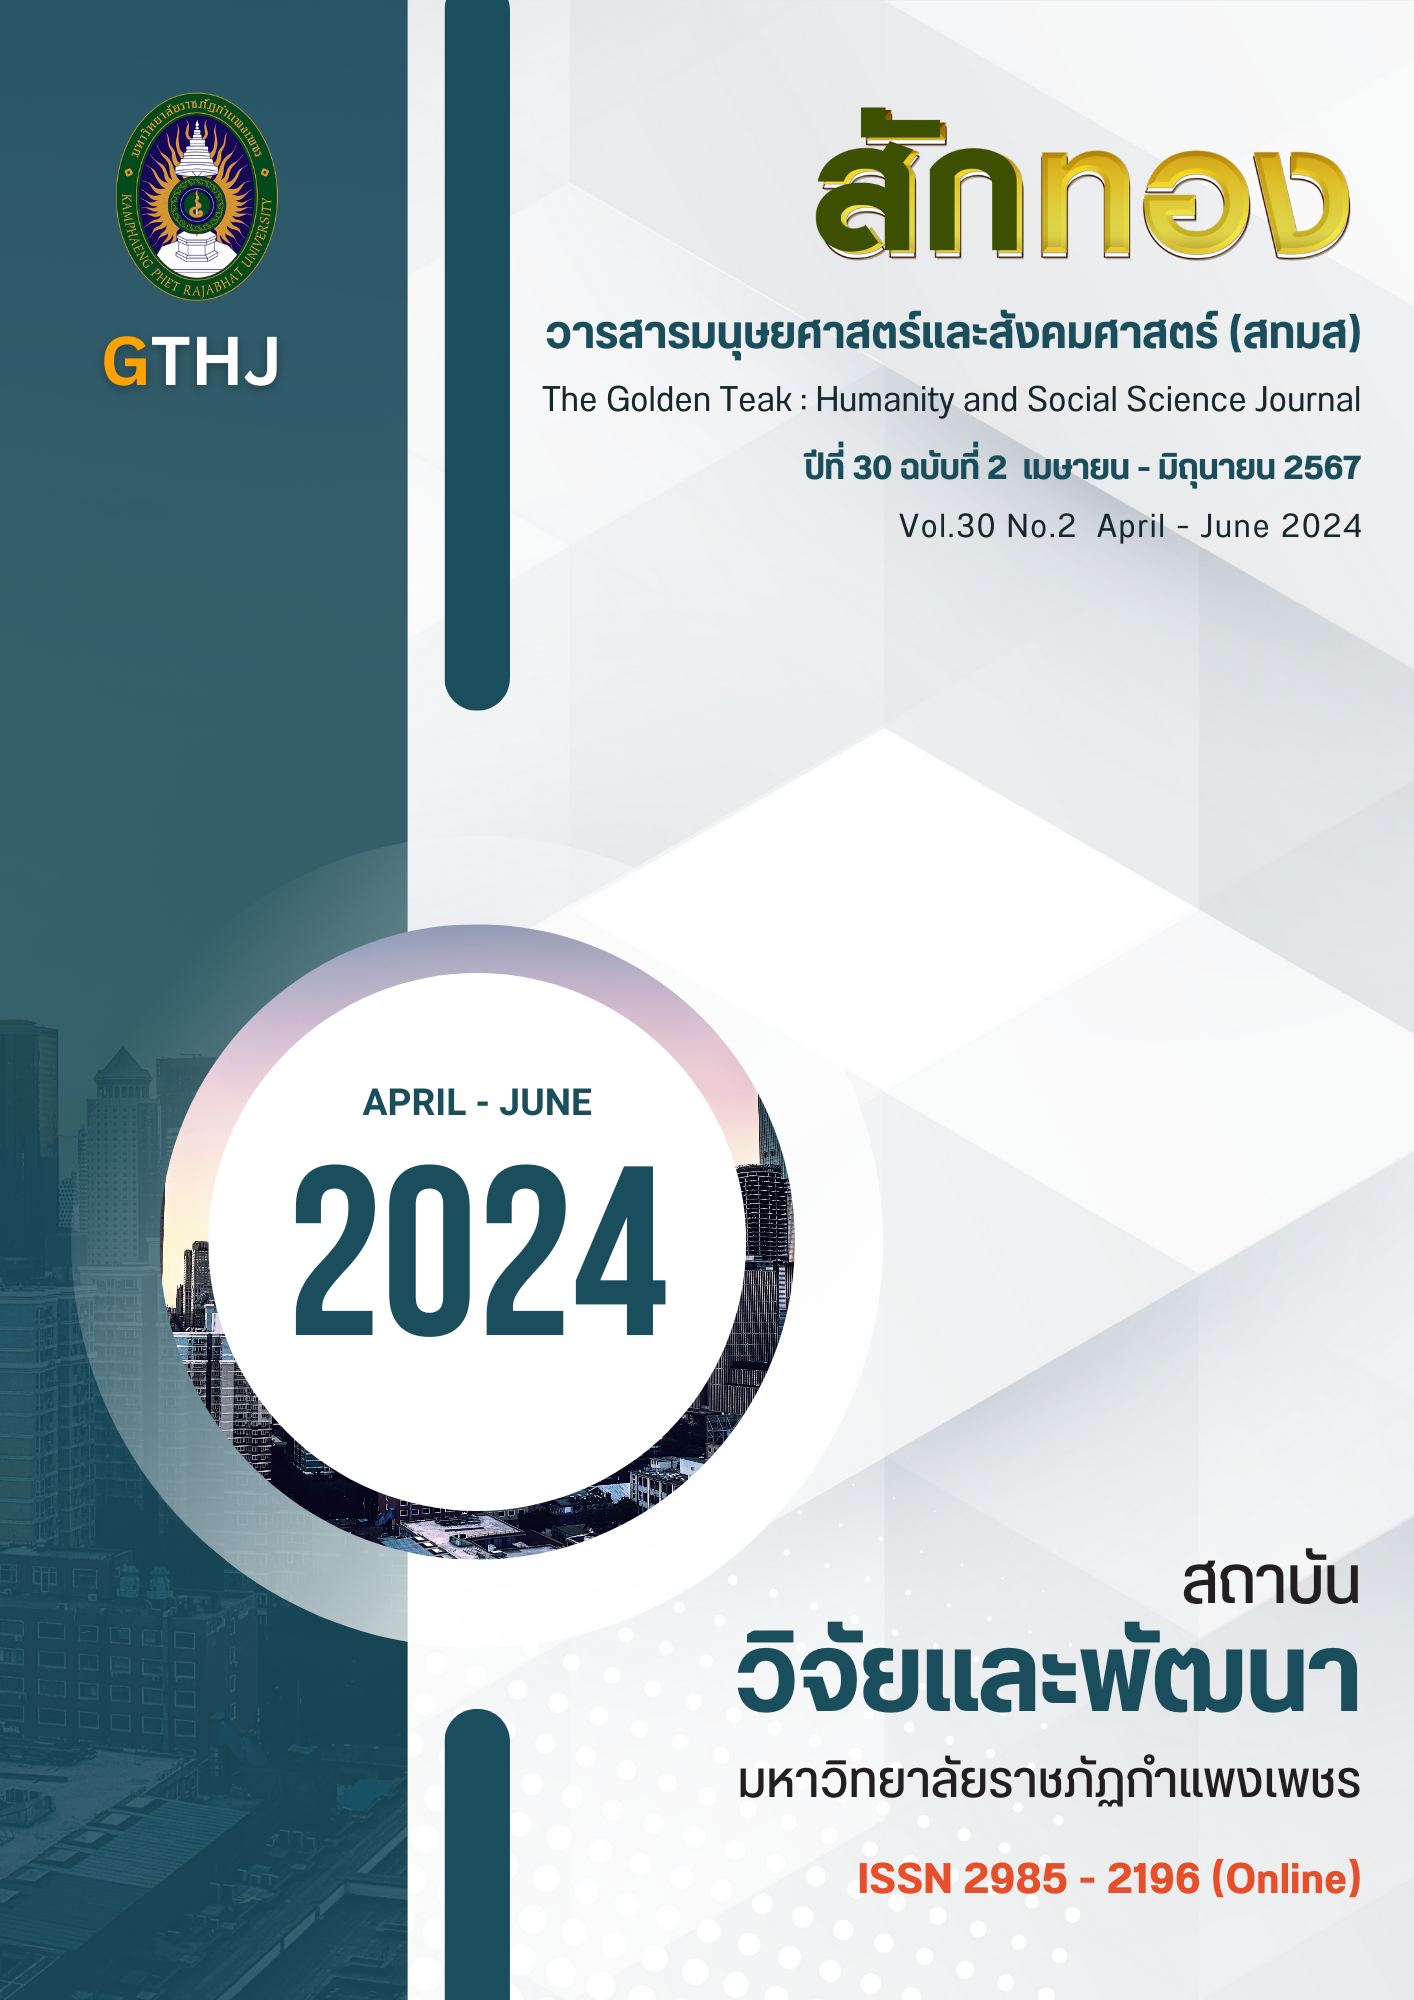 The Golden Teak : Humanity and Social Science Journal (GTHJ.) Vol.30 No.2 April-June 2024